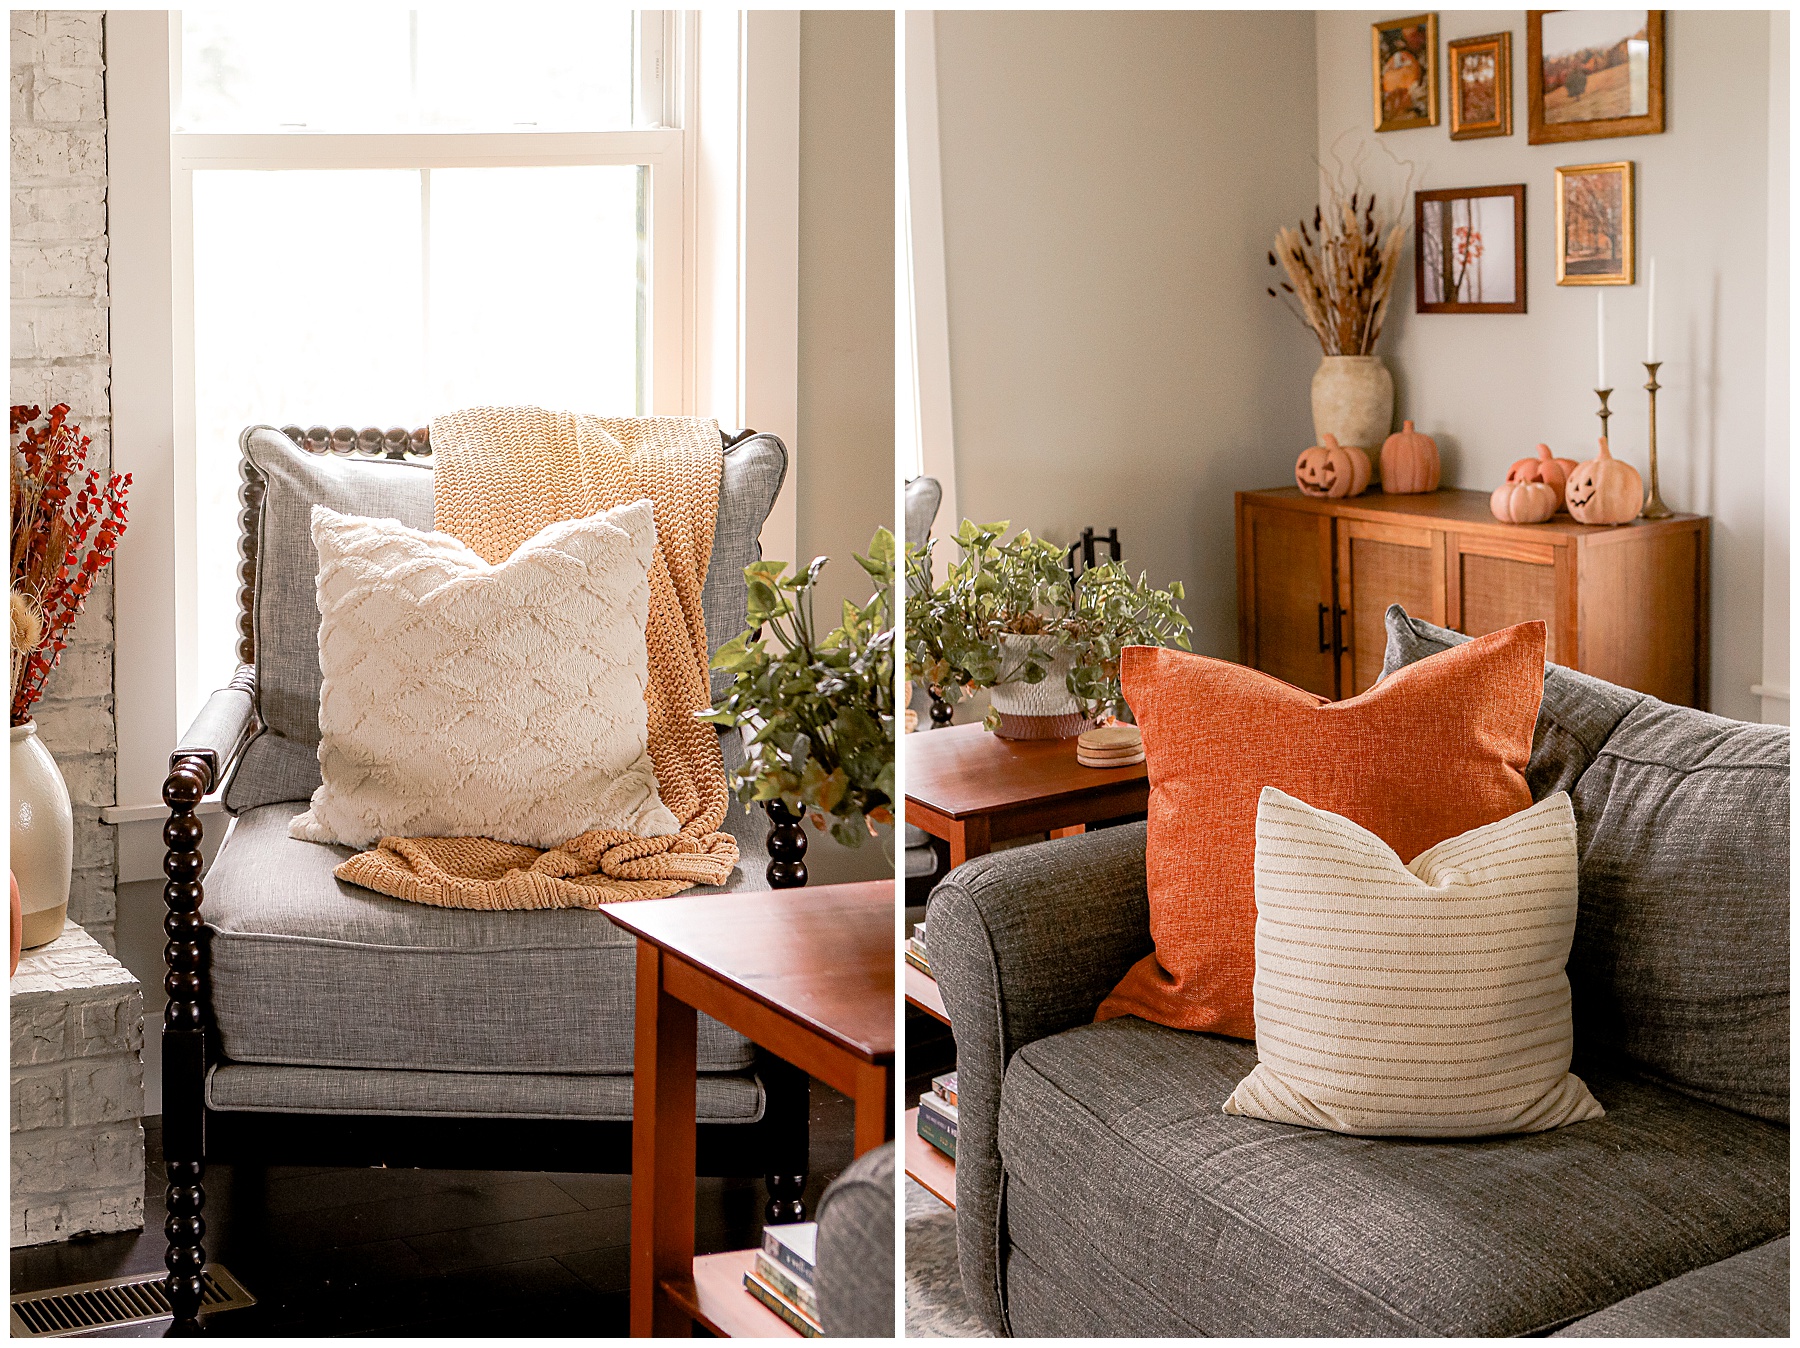 Fall pillows and blankets